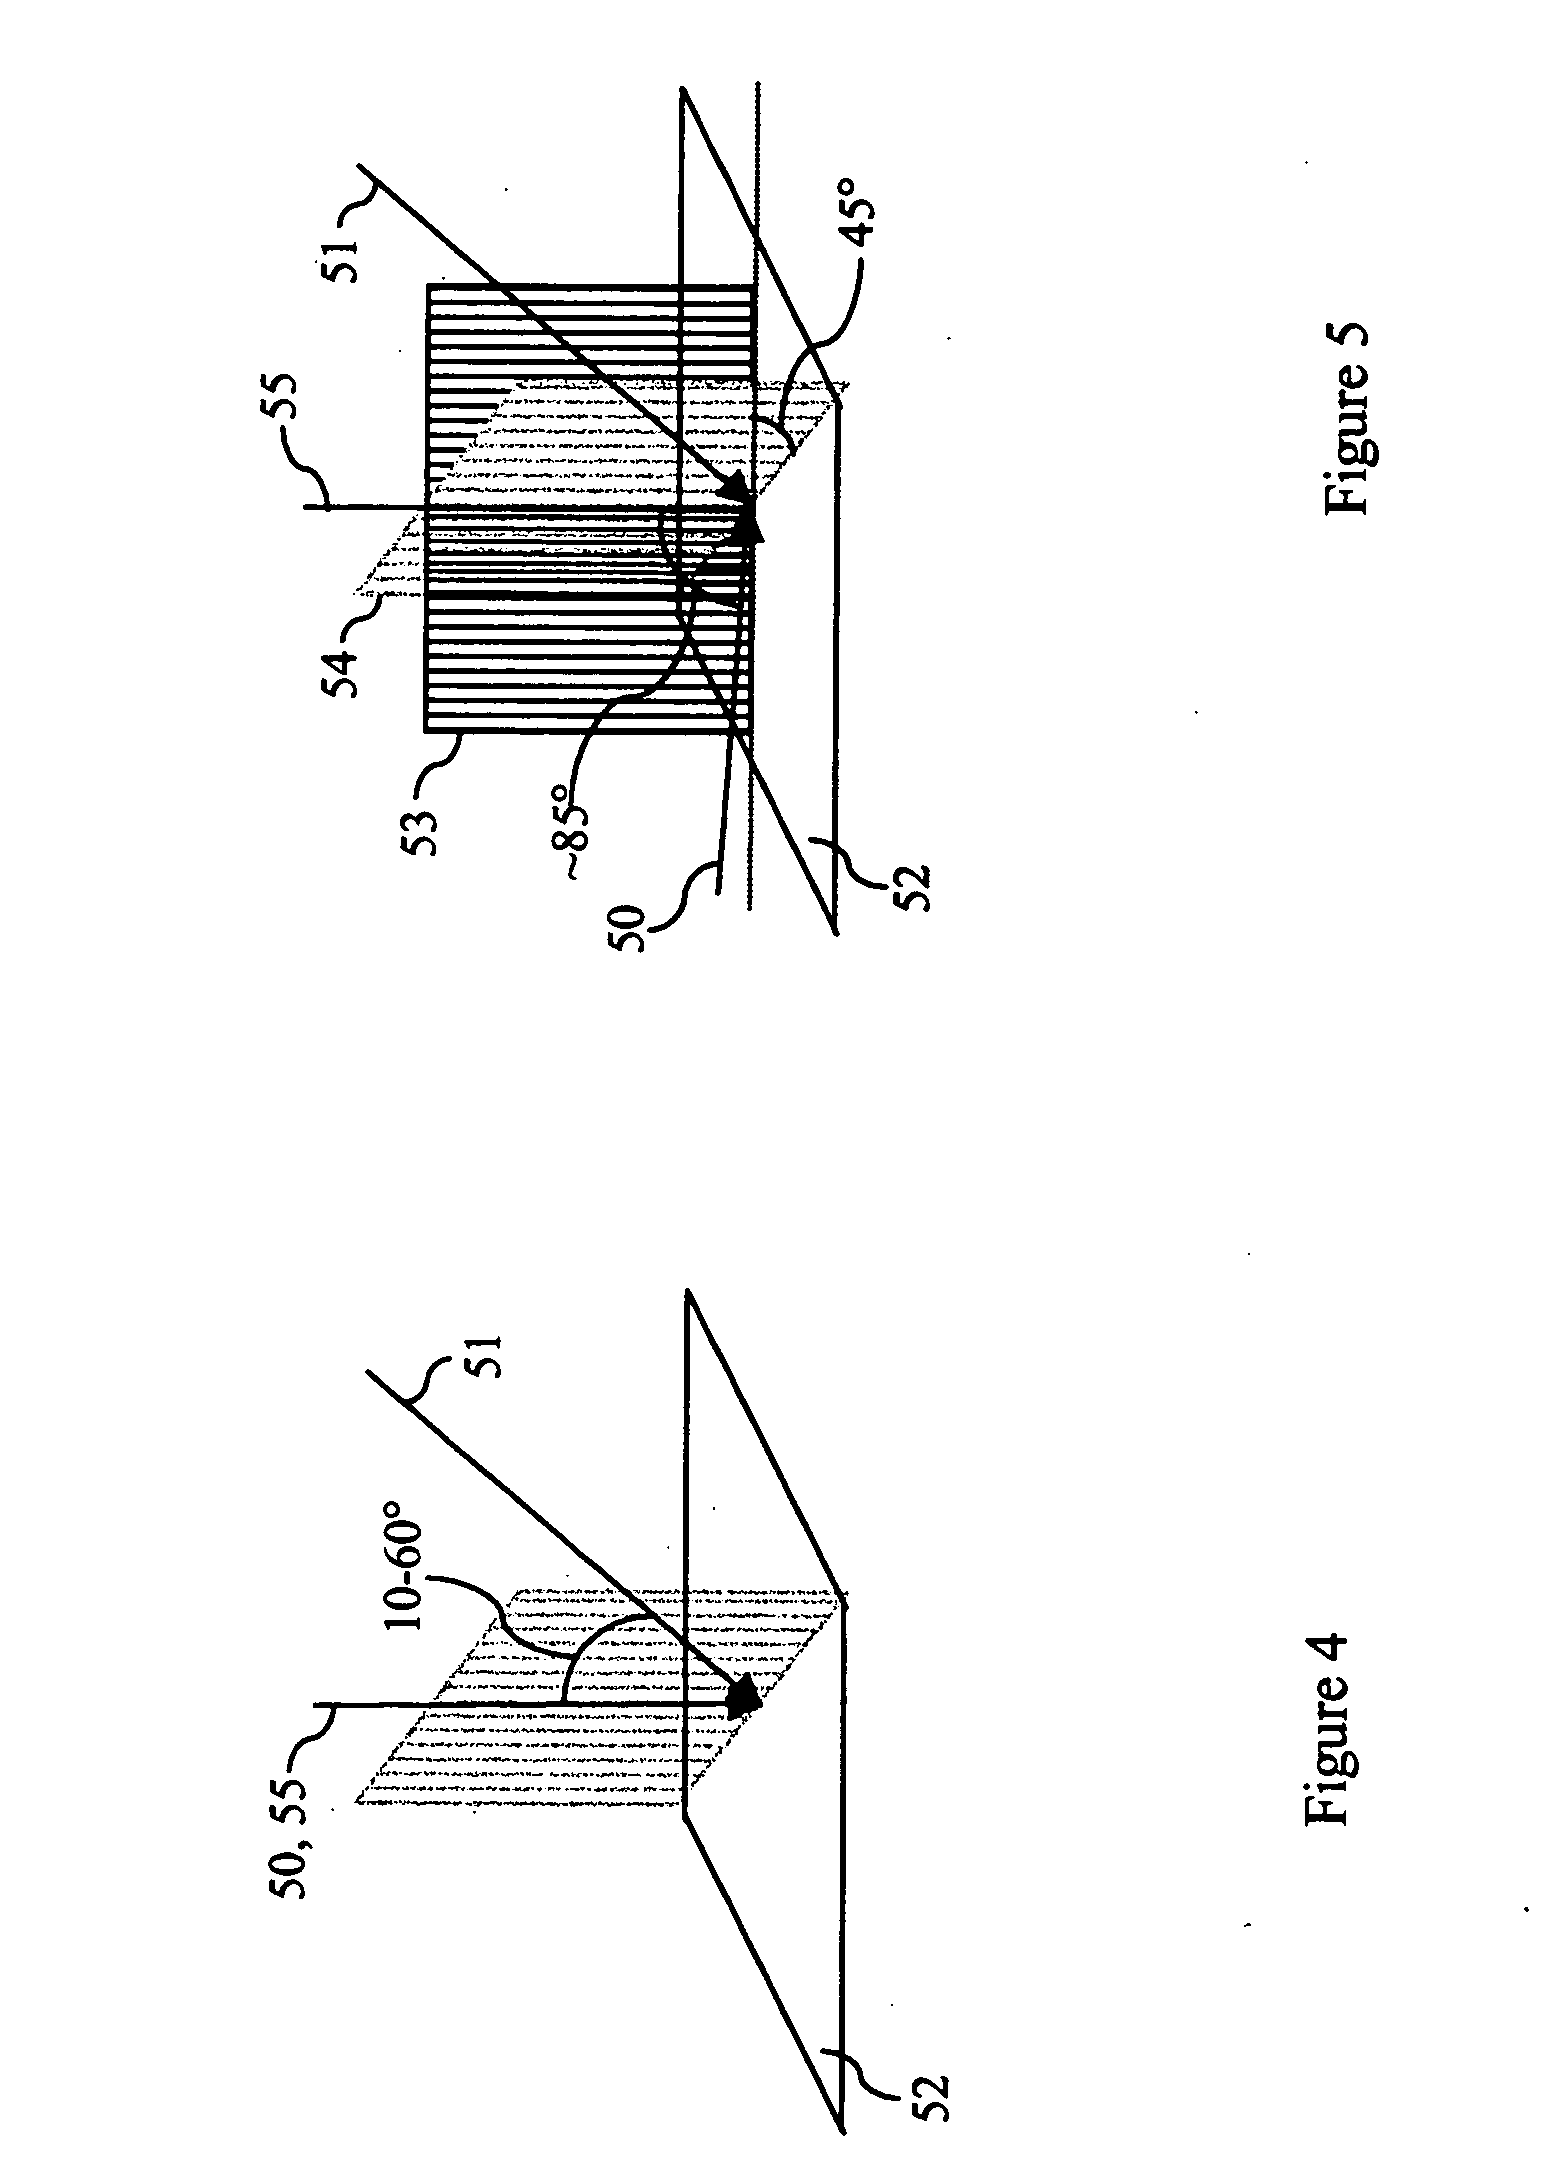 Biaxially-textured film deposition for superconductor coated tapes